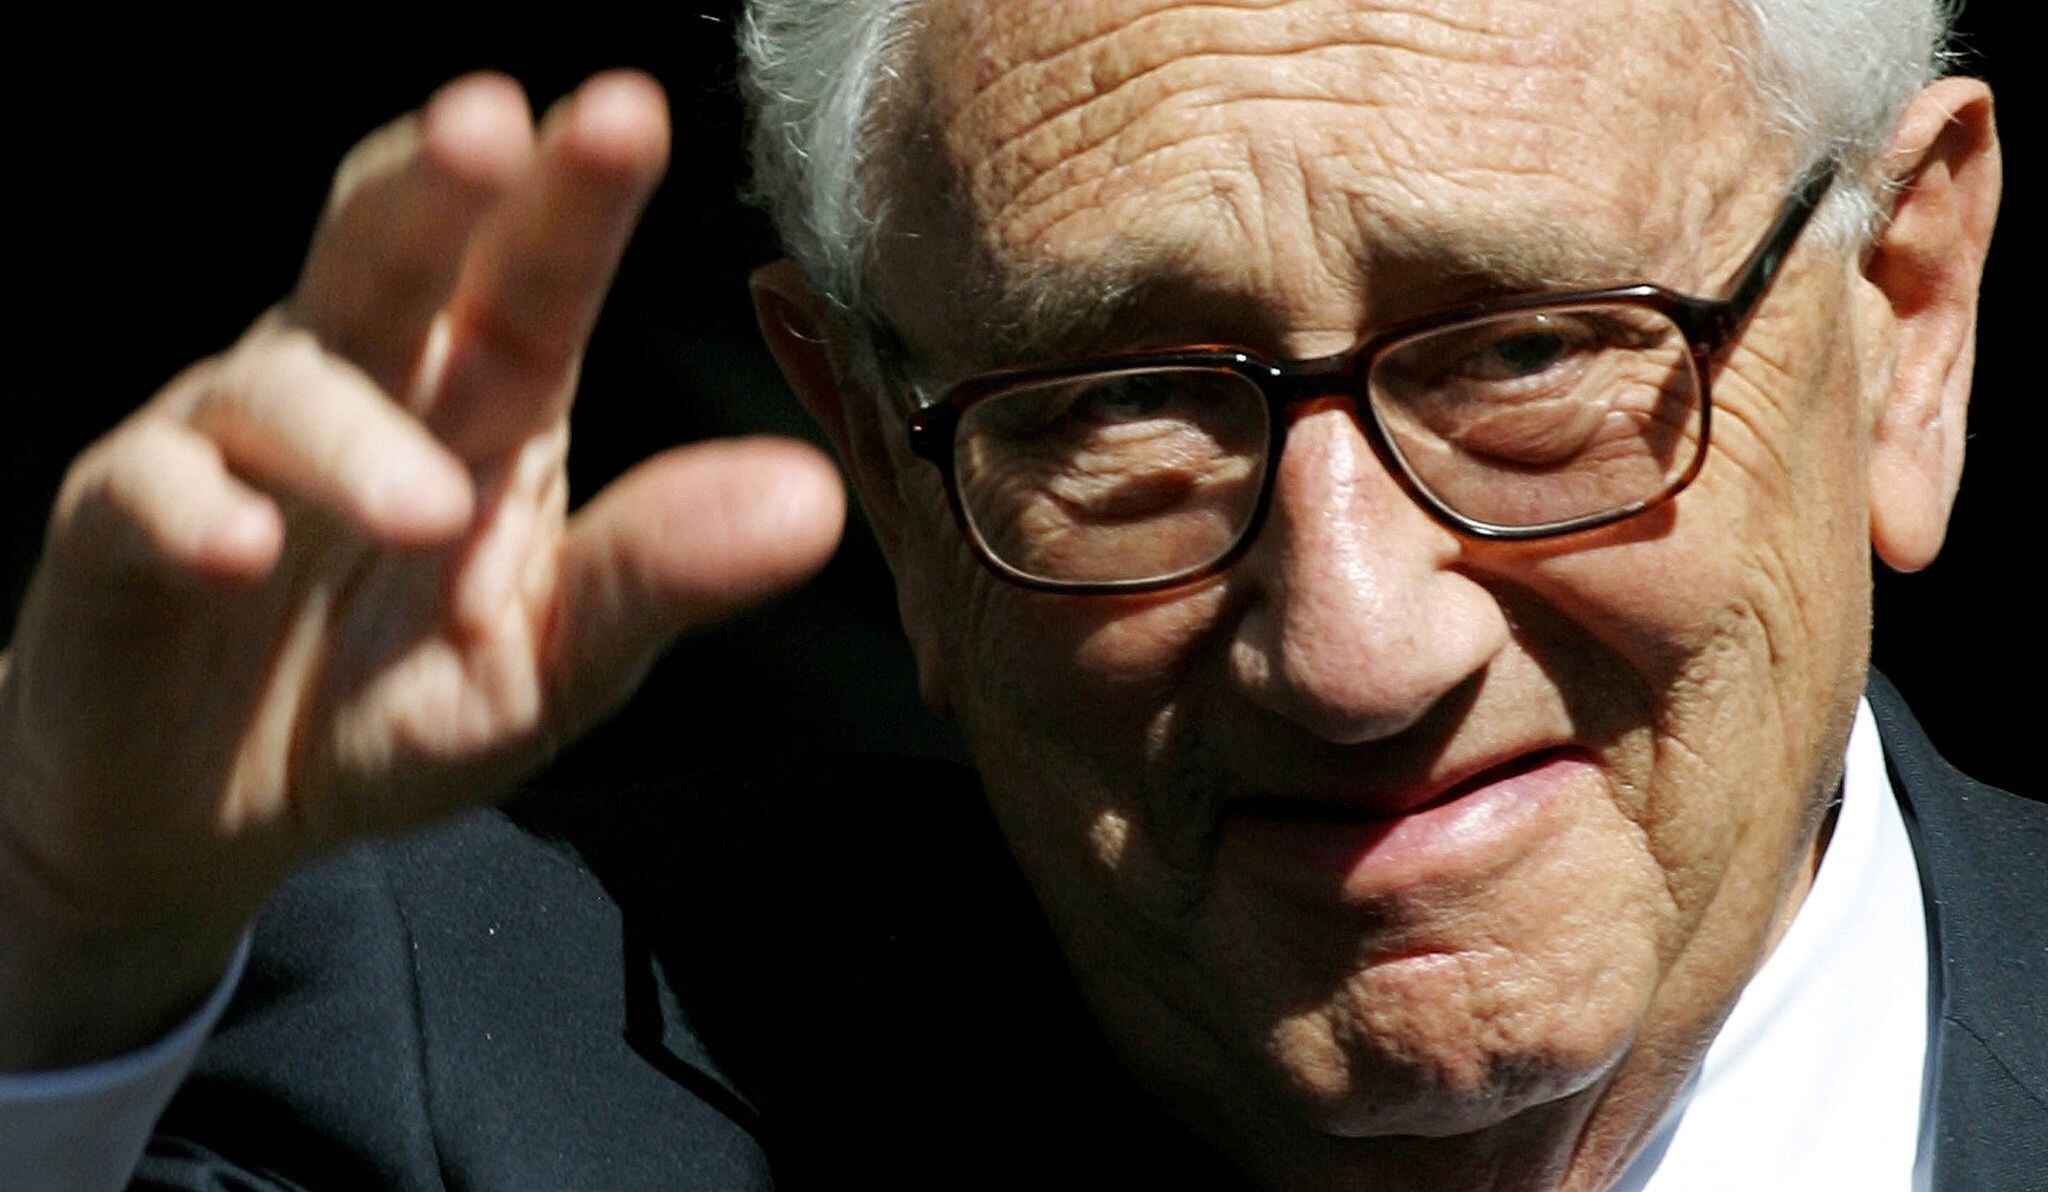 FILE PHOTO: Former U.S Secretary of State Dr Henry Kissinger waves to the media as he leaves the Royal Albert Hall in London, Britain April 24, 2002. REUTERS/Kieran Doherty/File Photo